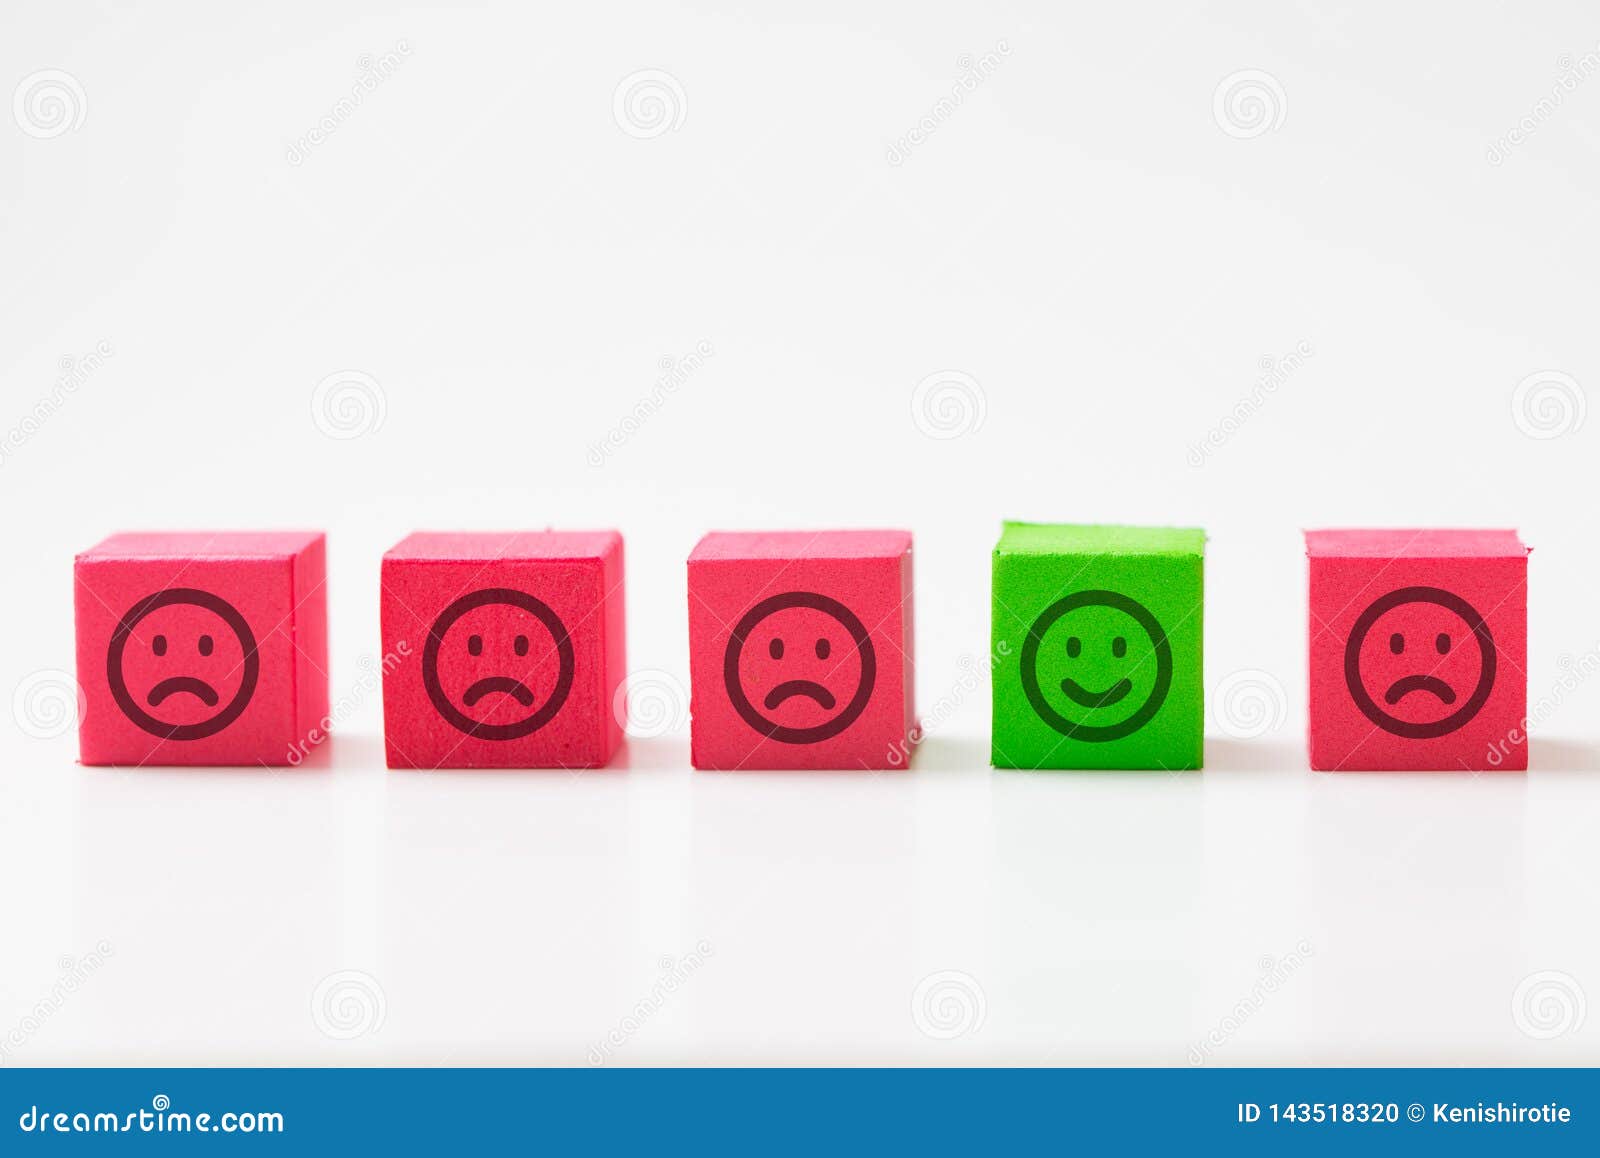 unique, optimistic, happiness, difference concept using single happy face among many sad faces.